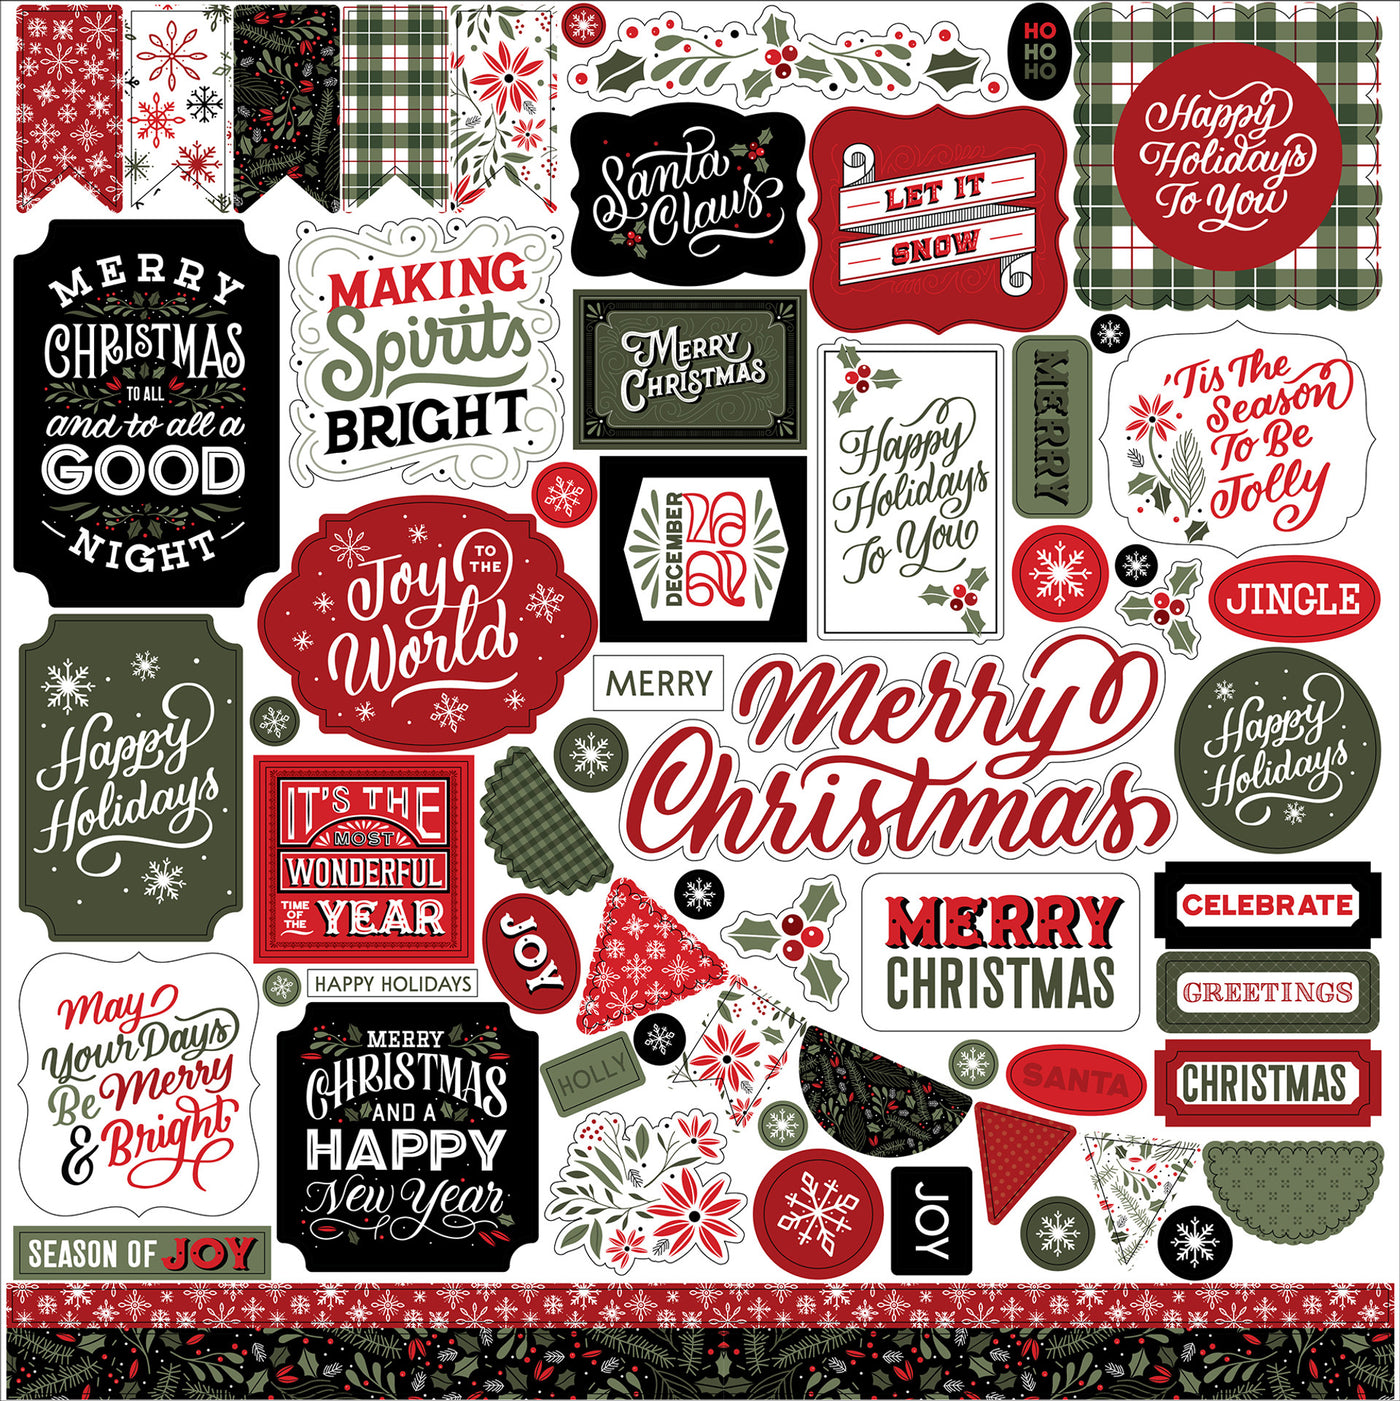 Christmas Salutations Elements 12" x 12" Cardstock Stickers from the Christmas Salutations Collection by Echo Park. These stickers include poinsettias, banners, holly, phrases, borders, and more!  